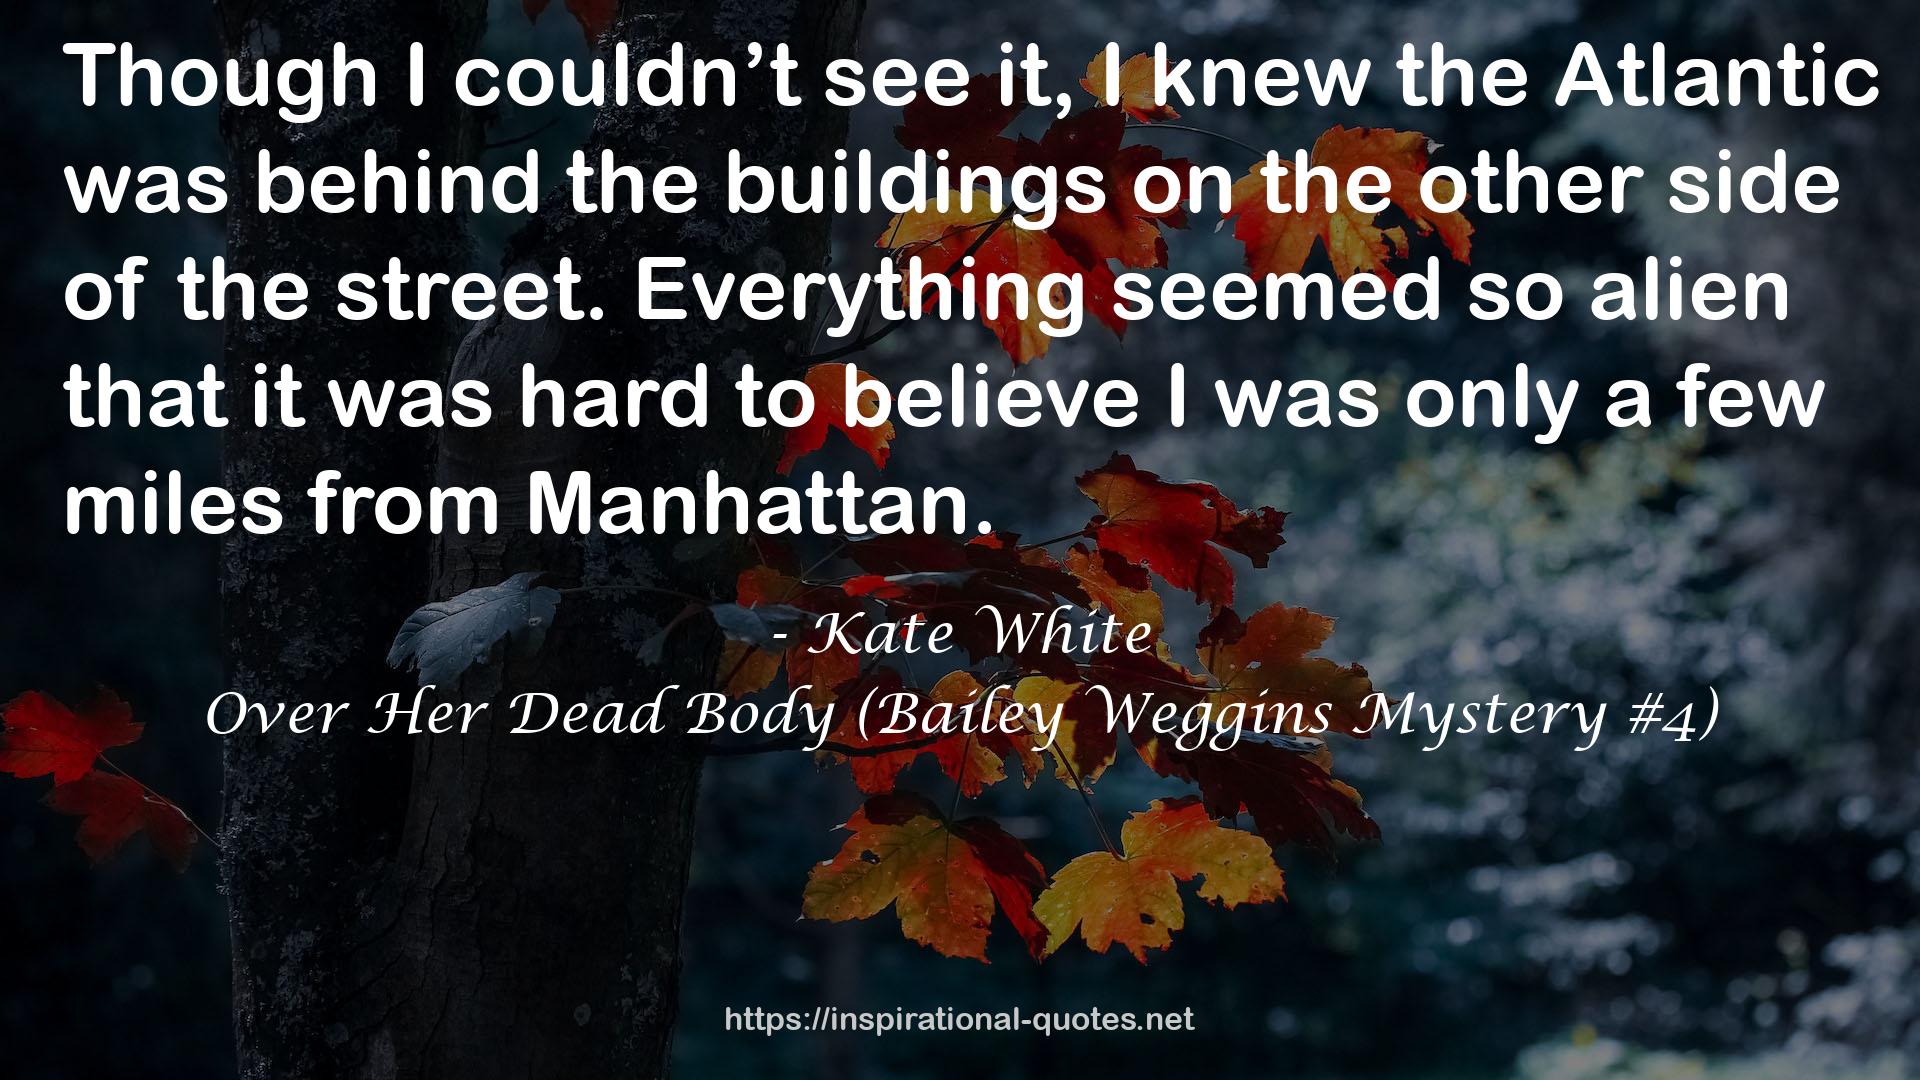 Over Her Dead Body (Bailey Weggins Mystery #4) QUOTES